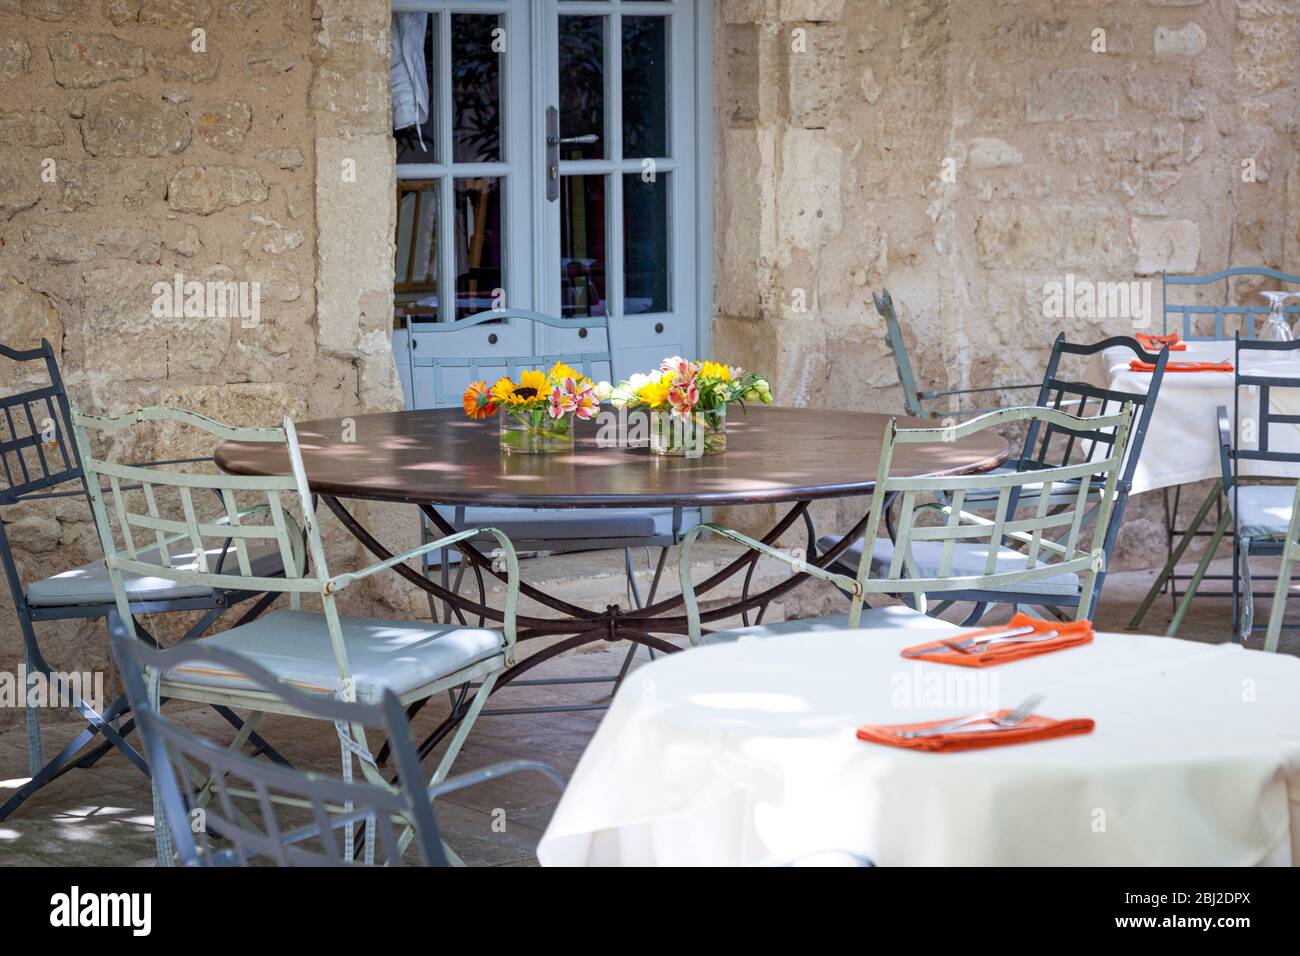 Tables and chairs at outdoor cafe in Gordes, Provence, France Stock Photo